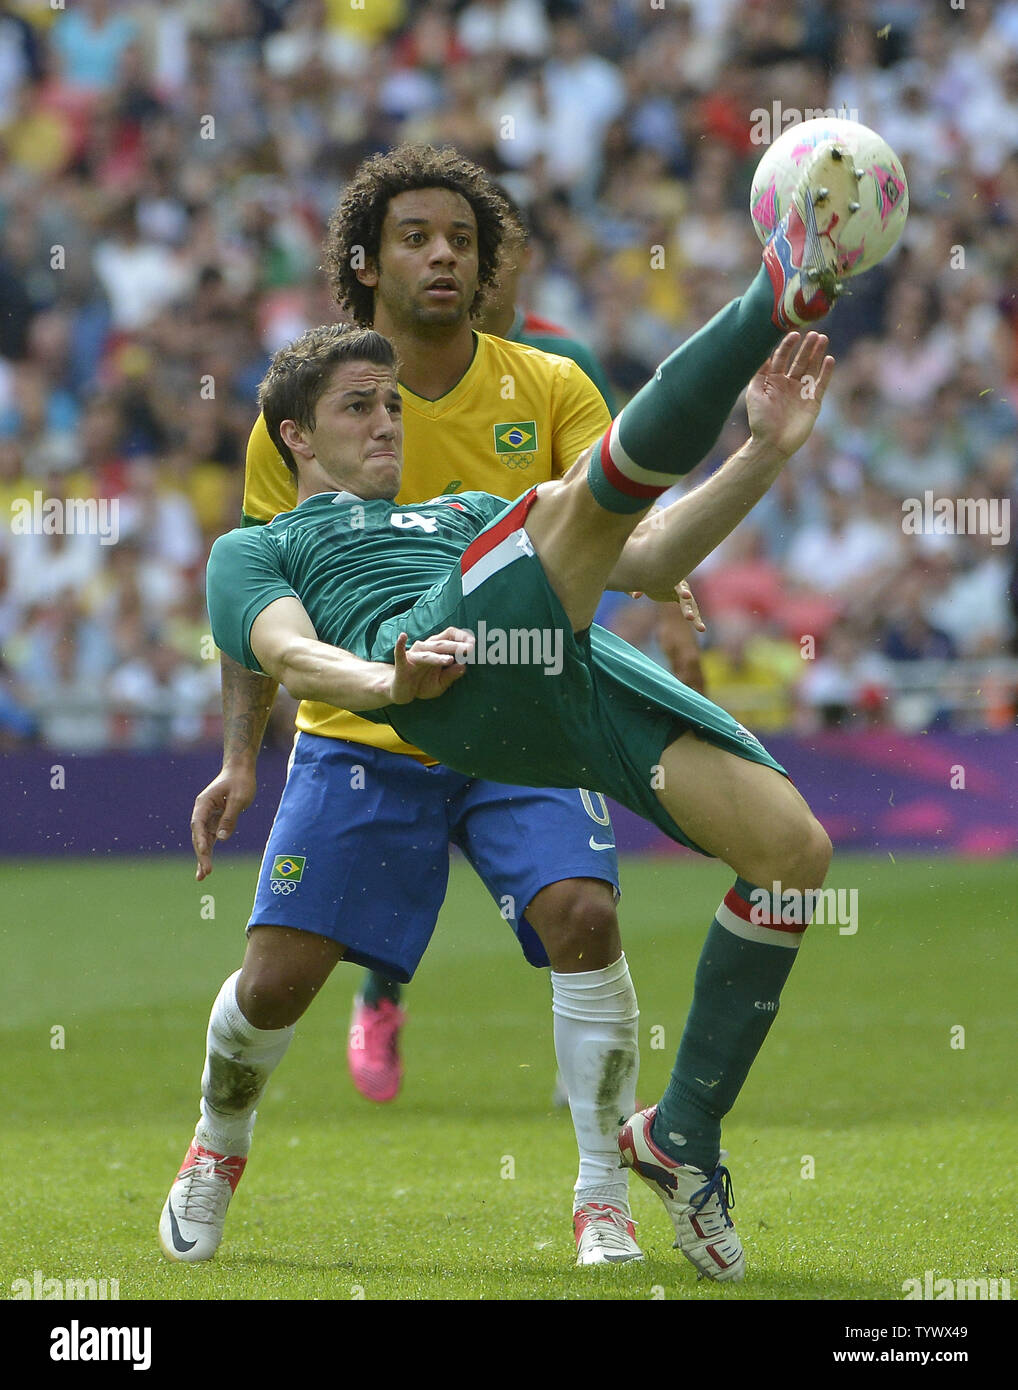 defender Hiram Mier of Mexico makes a bicycle kick as defender Marcelo of Brazil watches during the second half of the Gold Medal Football Match at the London 2012 Summer Olympics on August 11, 2012 at Wembley Stadium, London. Mexico defeated Brazil 2-1 to win the Gold Medal.      UPI/Brian Kersey Stock Photo